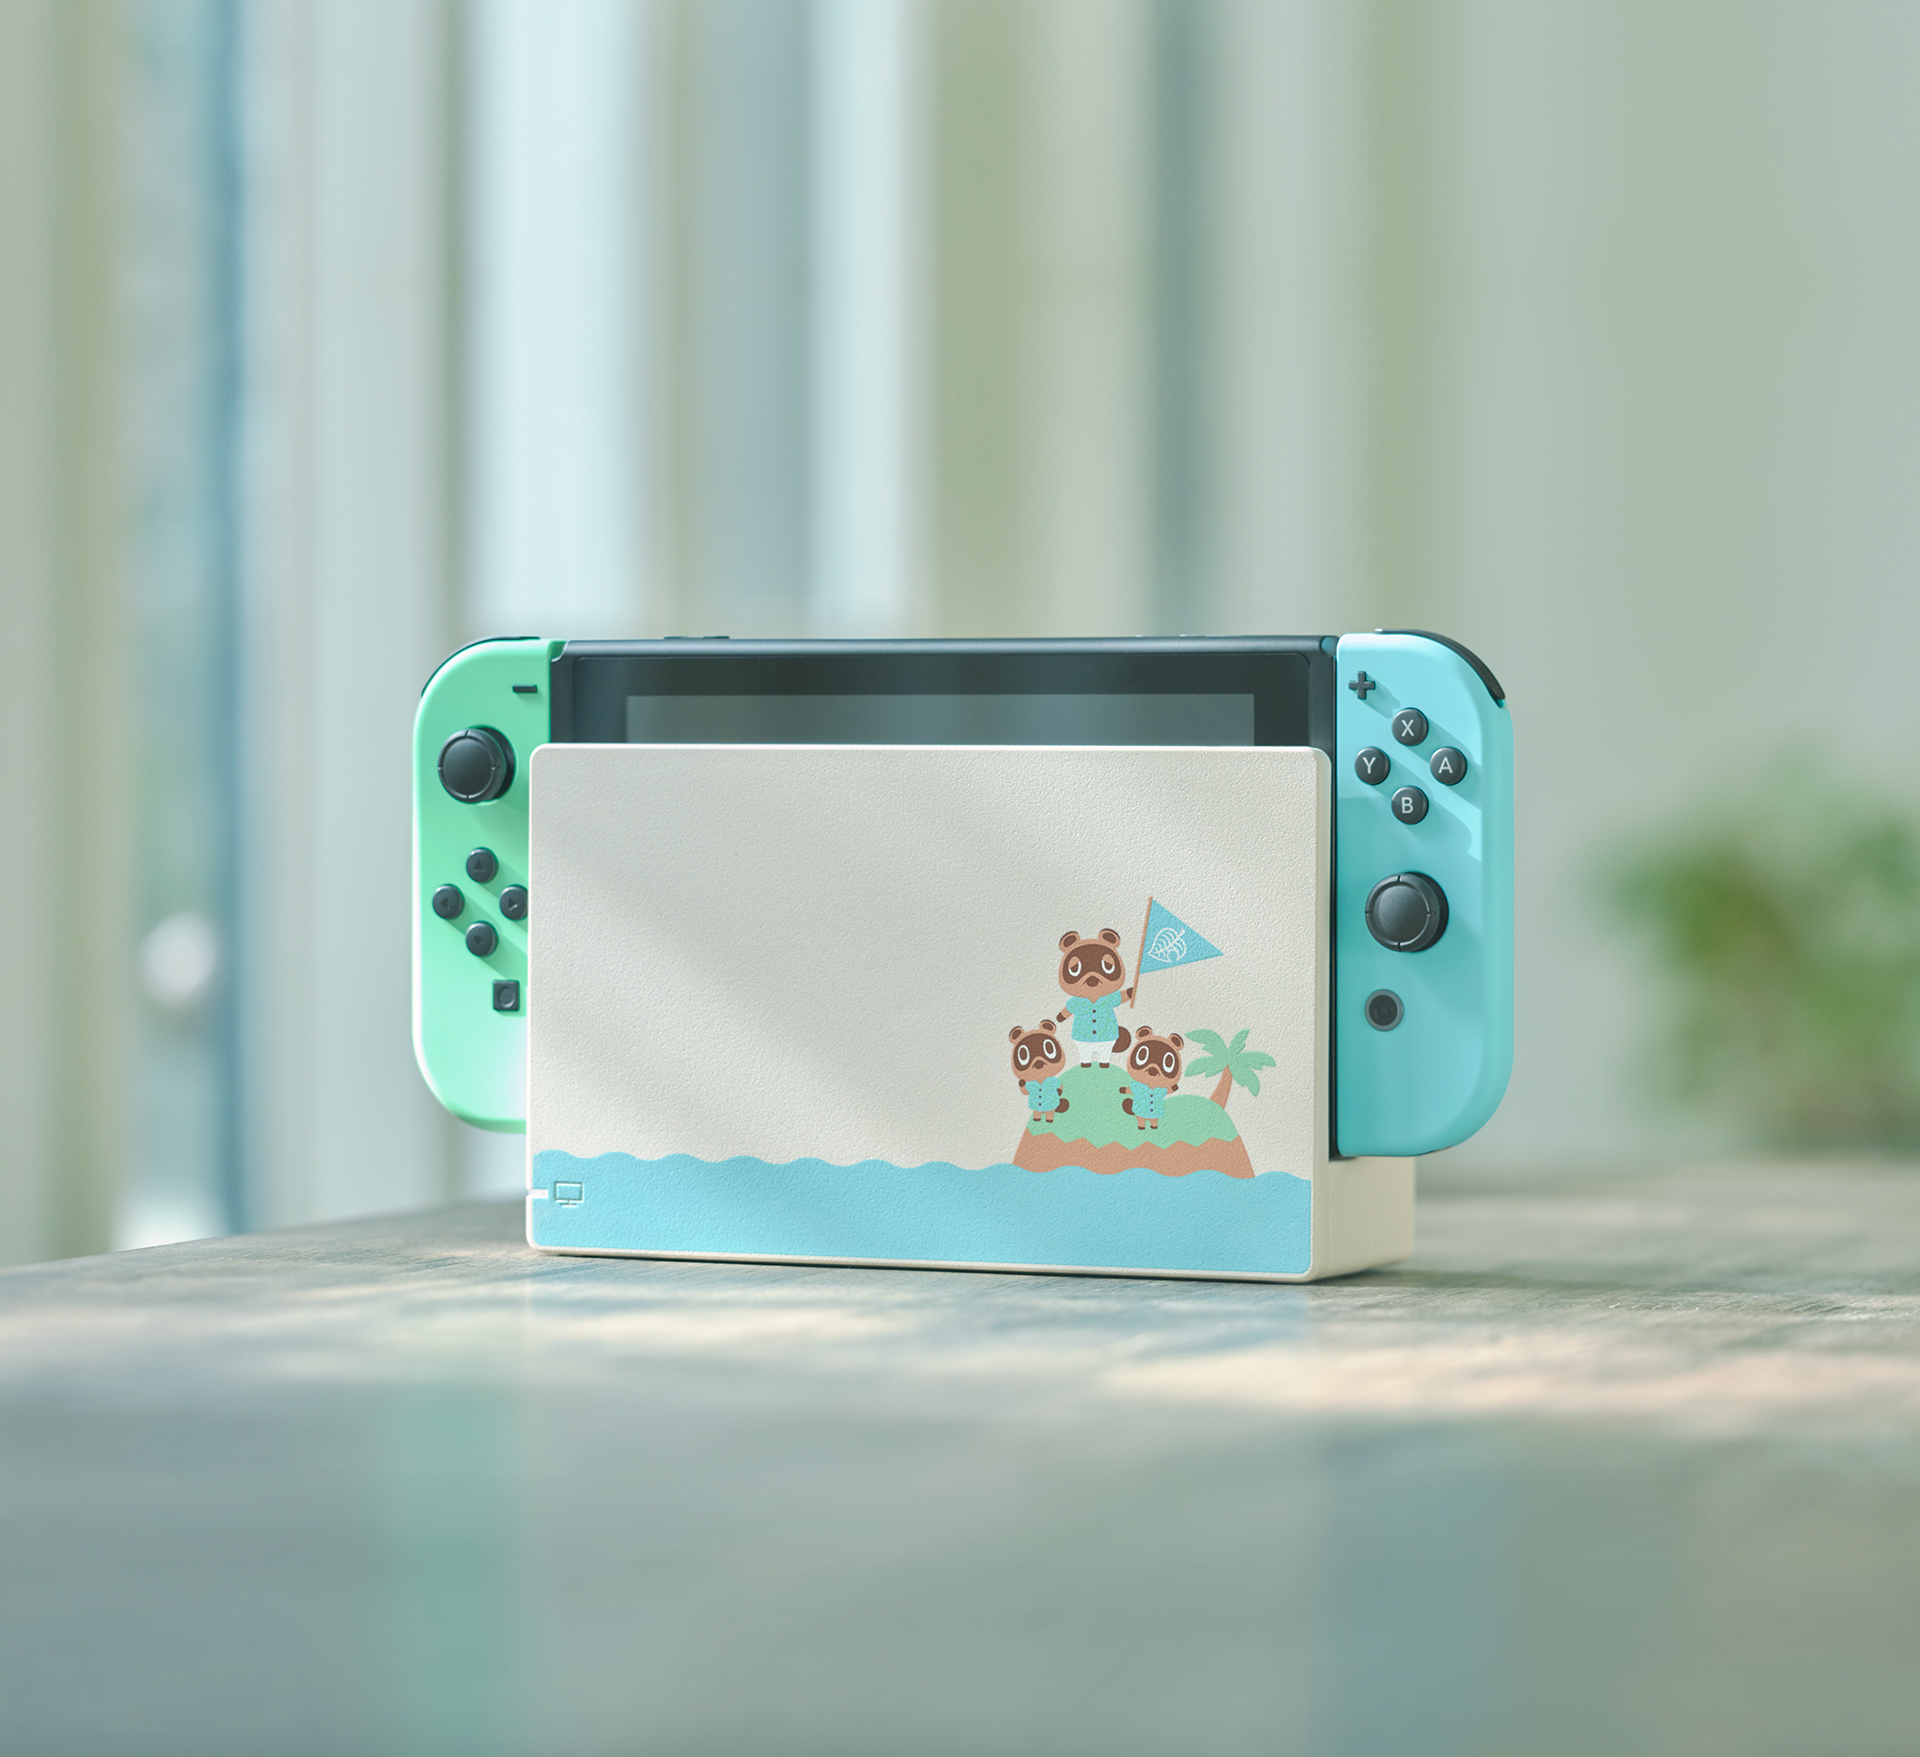 The Special Addition Animal Crossing Nintendo Switch Console Is Now Up For Pre-Orders